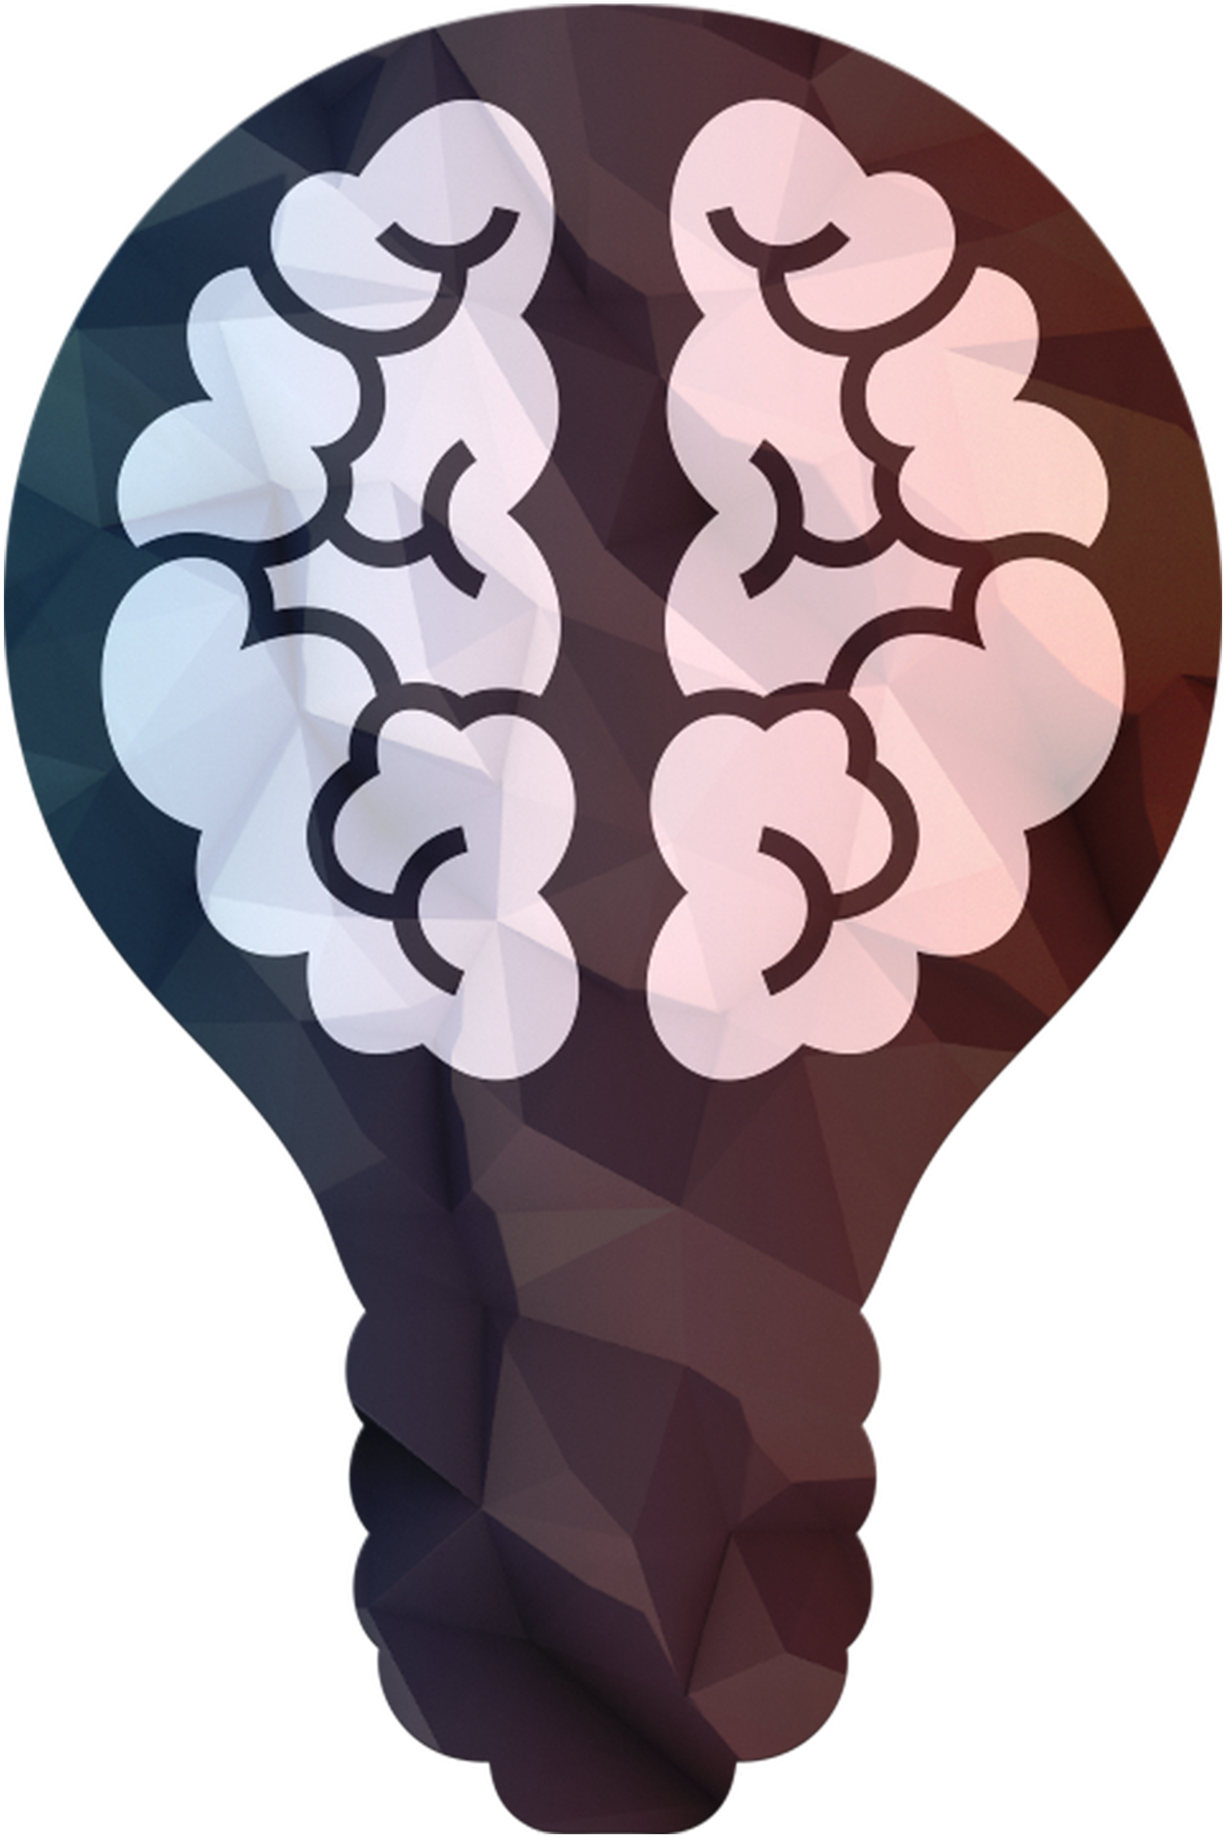 Is There An Opportunity For Cross-advocacy Brain Injury - Lamp Icon Png (1600x1920)